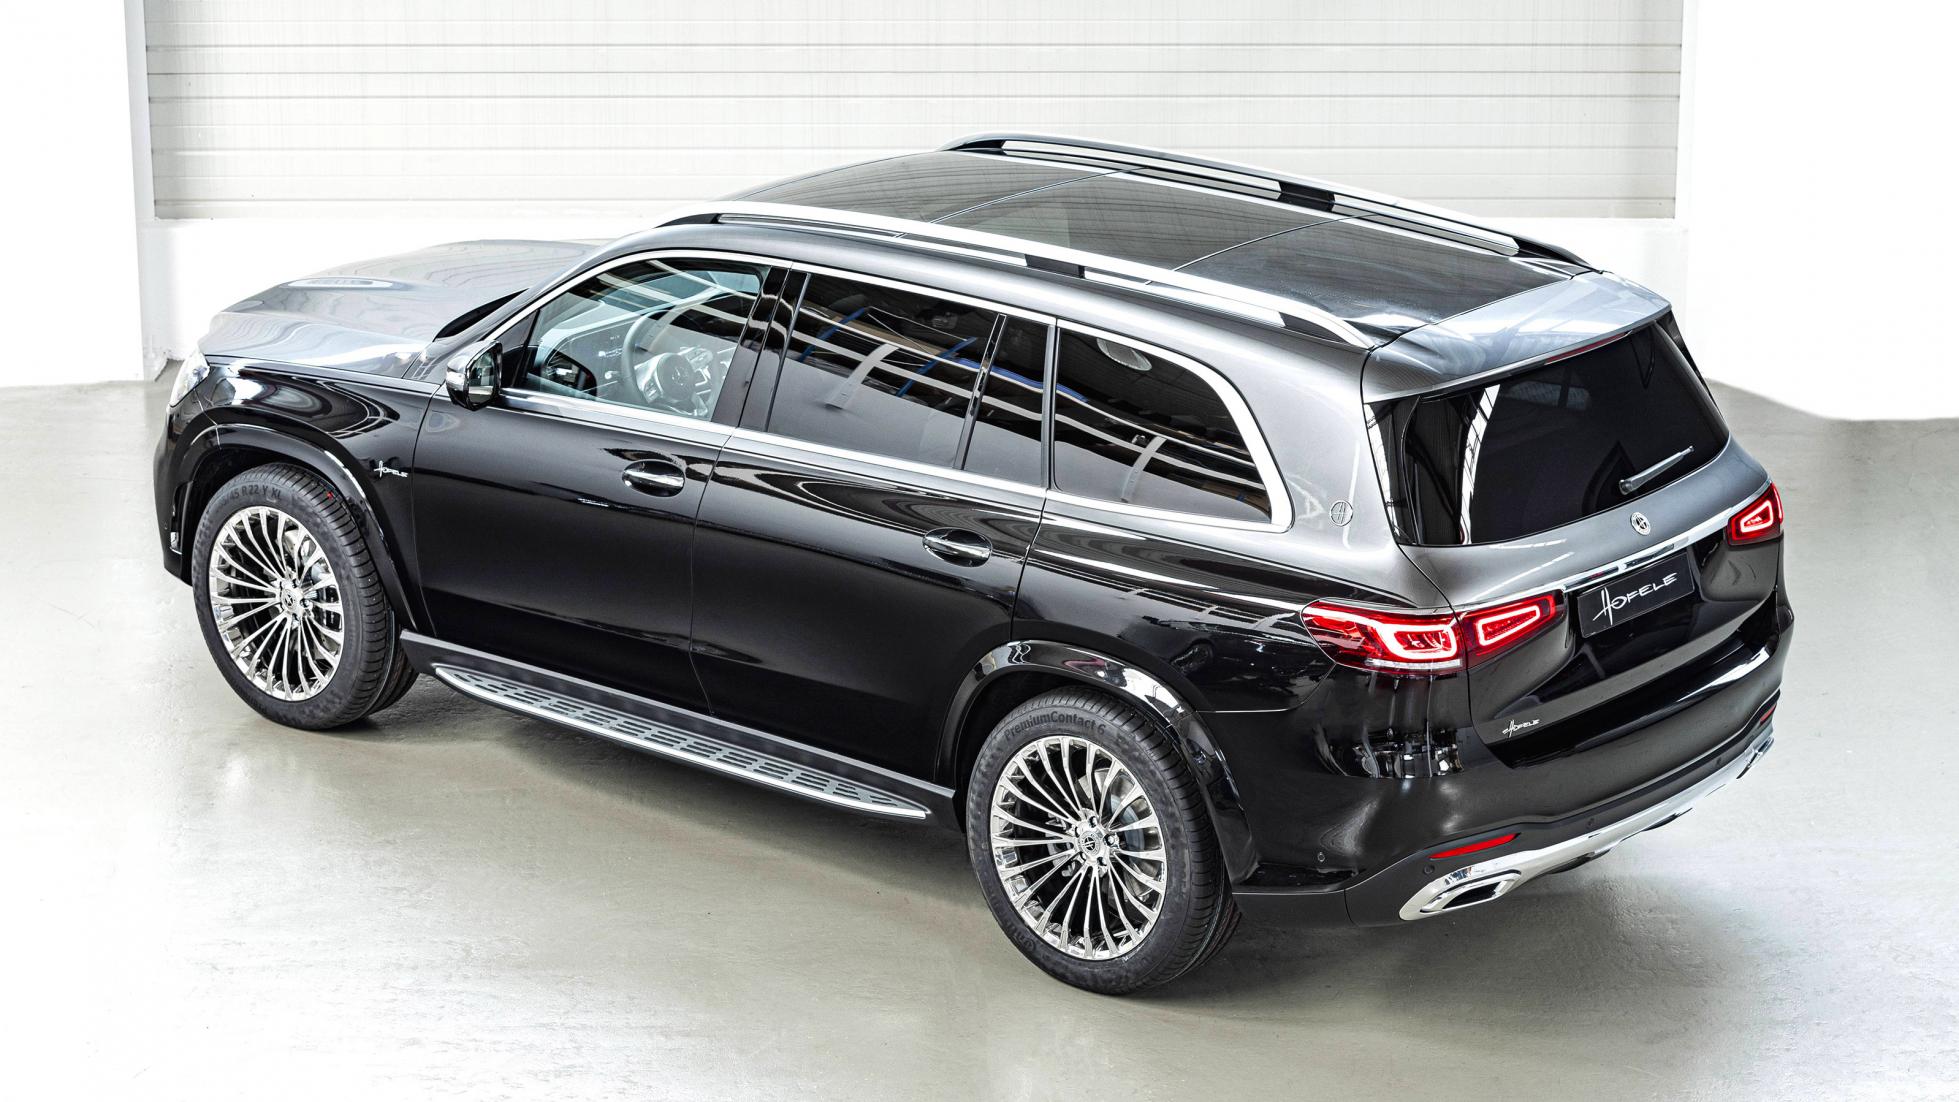 The Hofele Mercedes GLS is like a Maybach with less grille